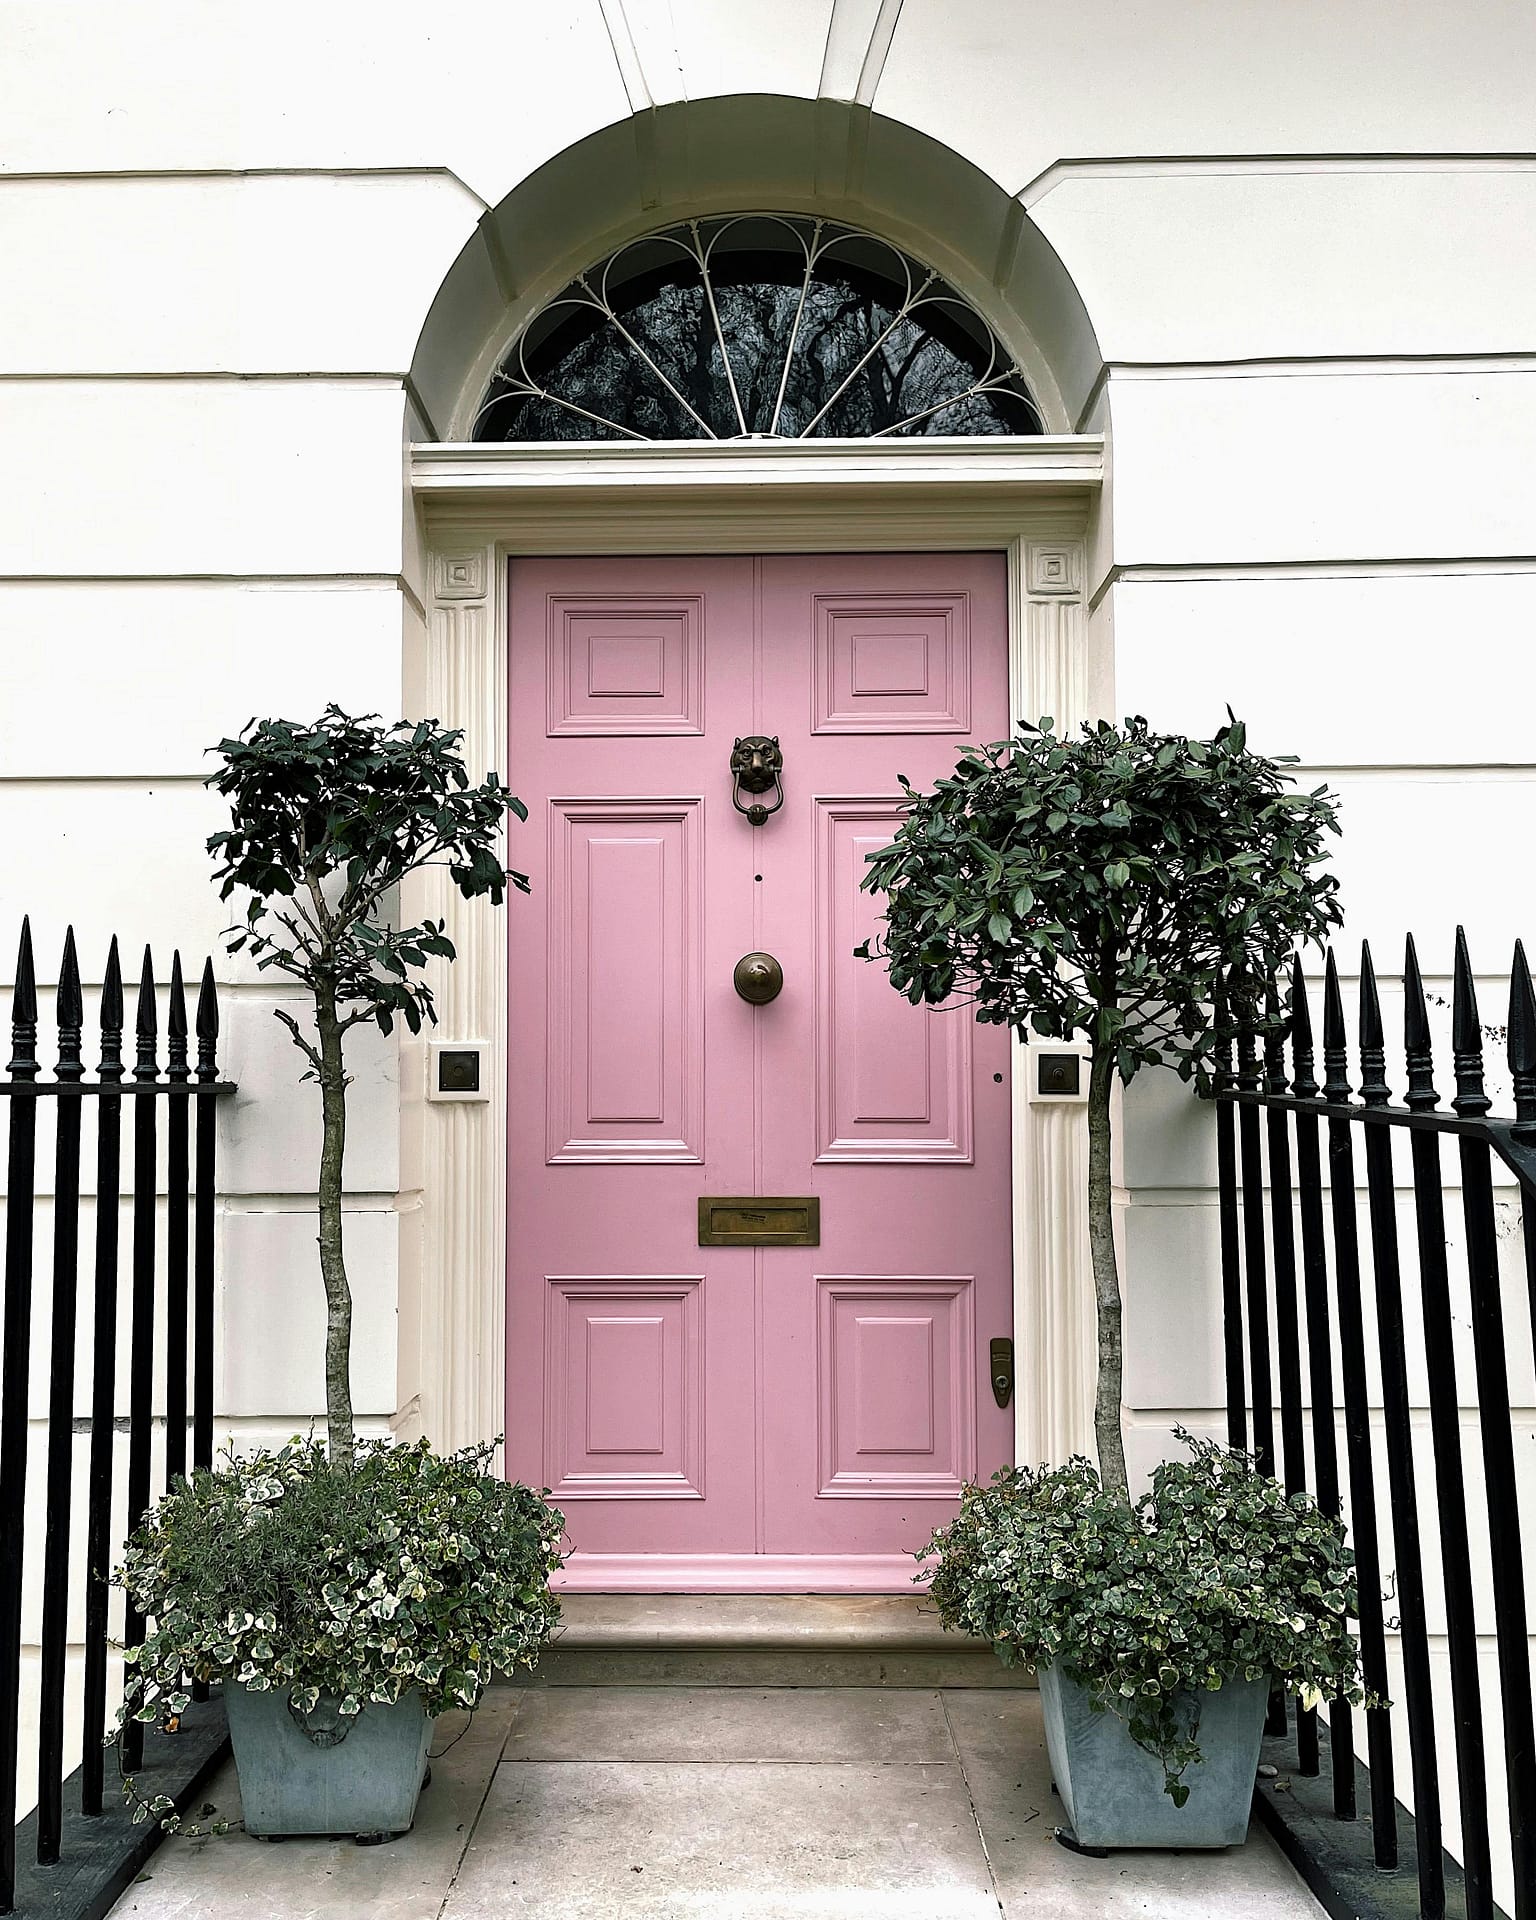 Get inside that dream front door using bridging loan to achieve the purchase quickly. bridging finance for chain breaking.